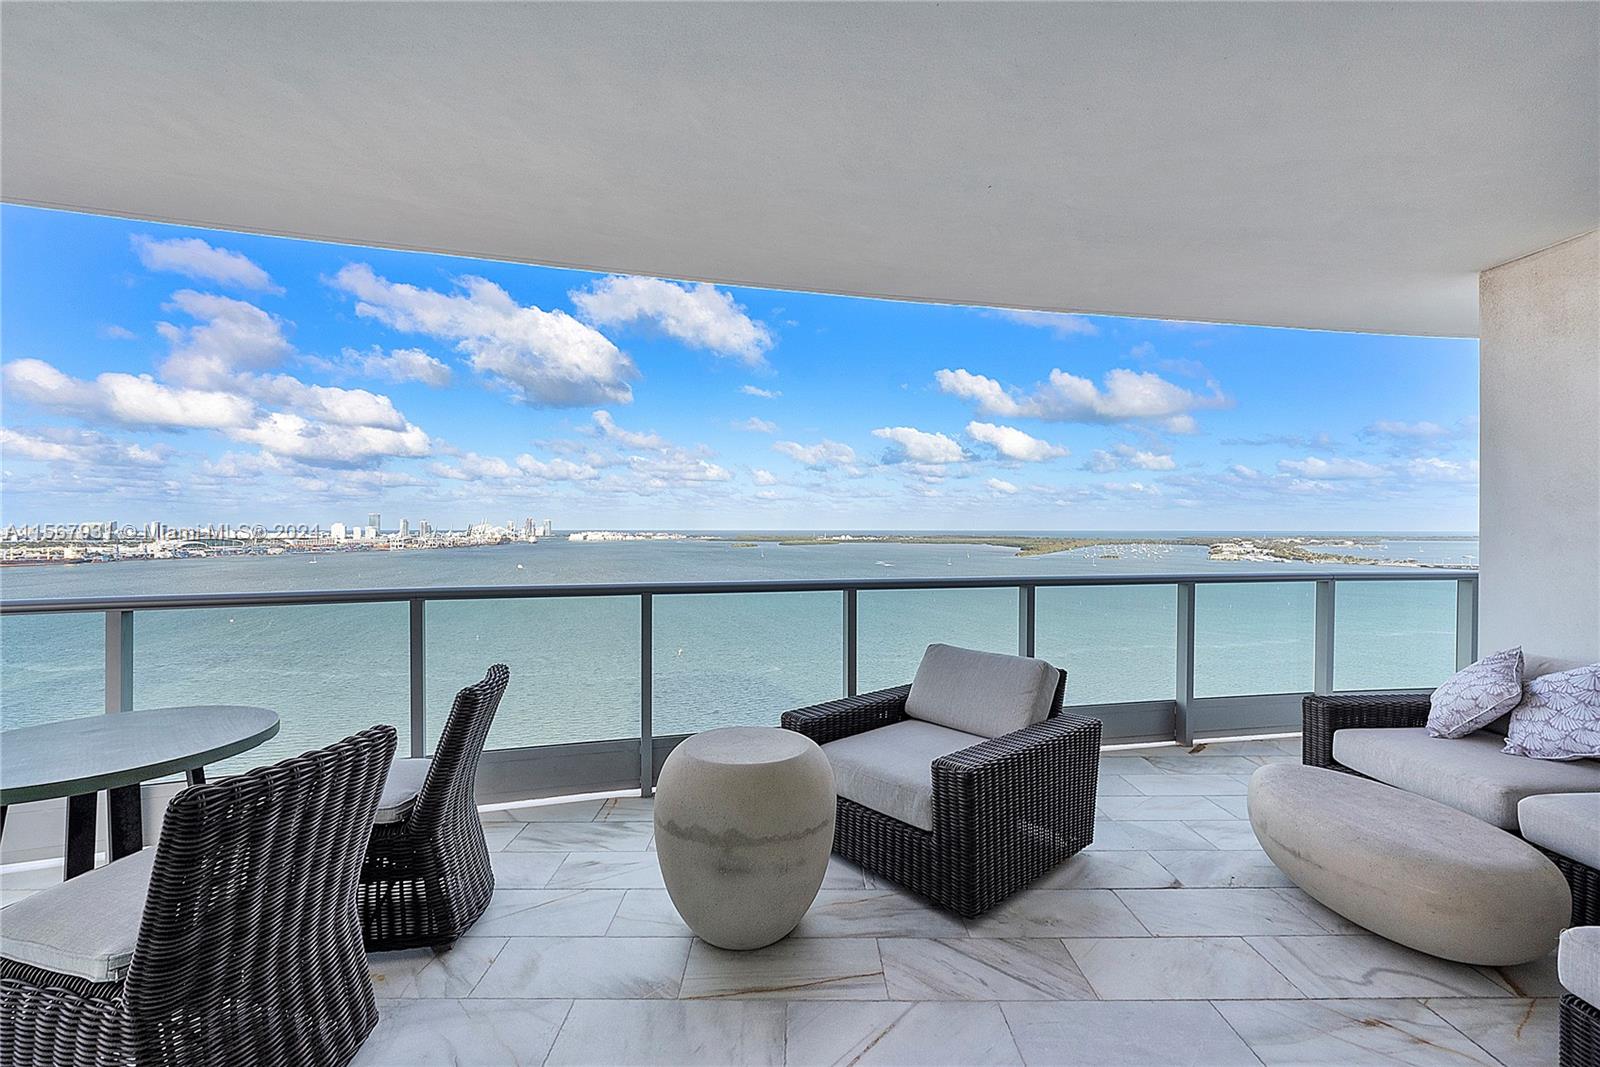 Experience the luxury of Jade Residences at Brickell with direct panoramic views of the ocean on the most sought-after corner unit. Unit is furnished and features a state-of-the-art kitchen with designer cabinetry, stainless steel appliances, cappuccino maker and wine cooler. Endless Ocean views from every room in the unit through expansive floor to ceiling impact windows. Infinity edge pool, Sauna, steam room, fitness center, European spa, racquetball, and utmost personalized concierge services. A resort lifestyle awaits you.  Steps to the best restaurants and entertainment in Brickell. This building has no assessments and is well-maintained.